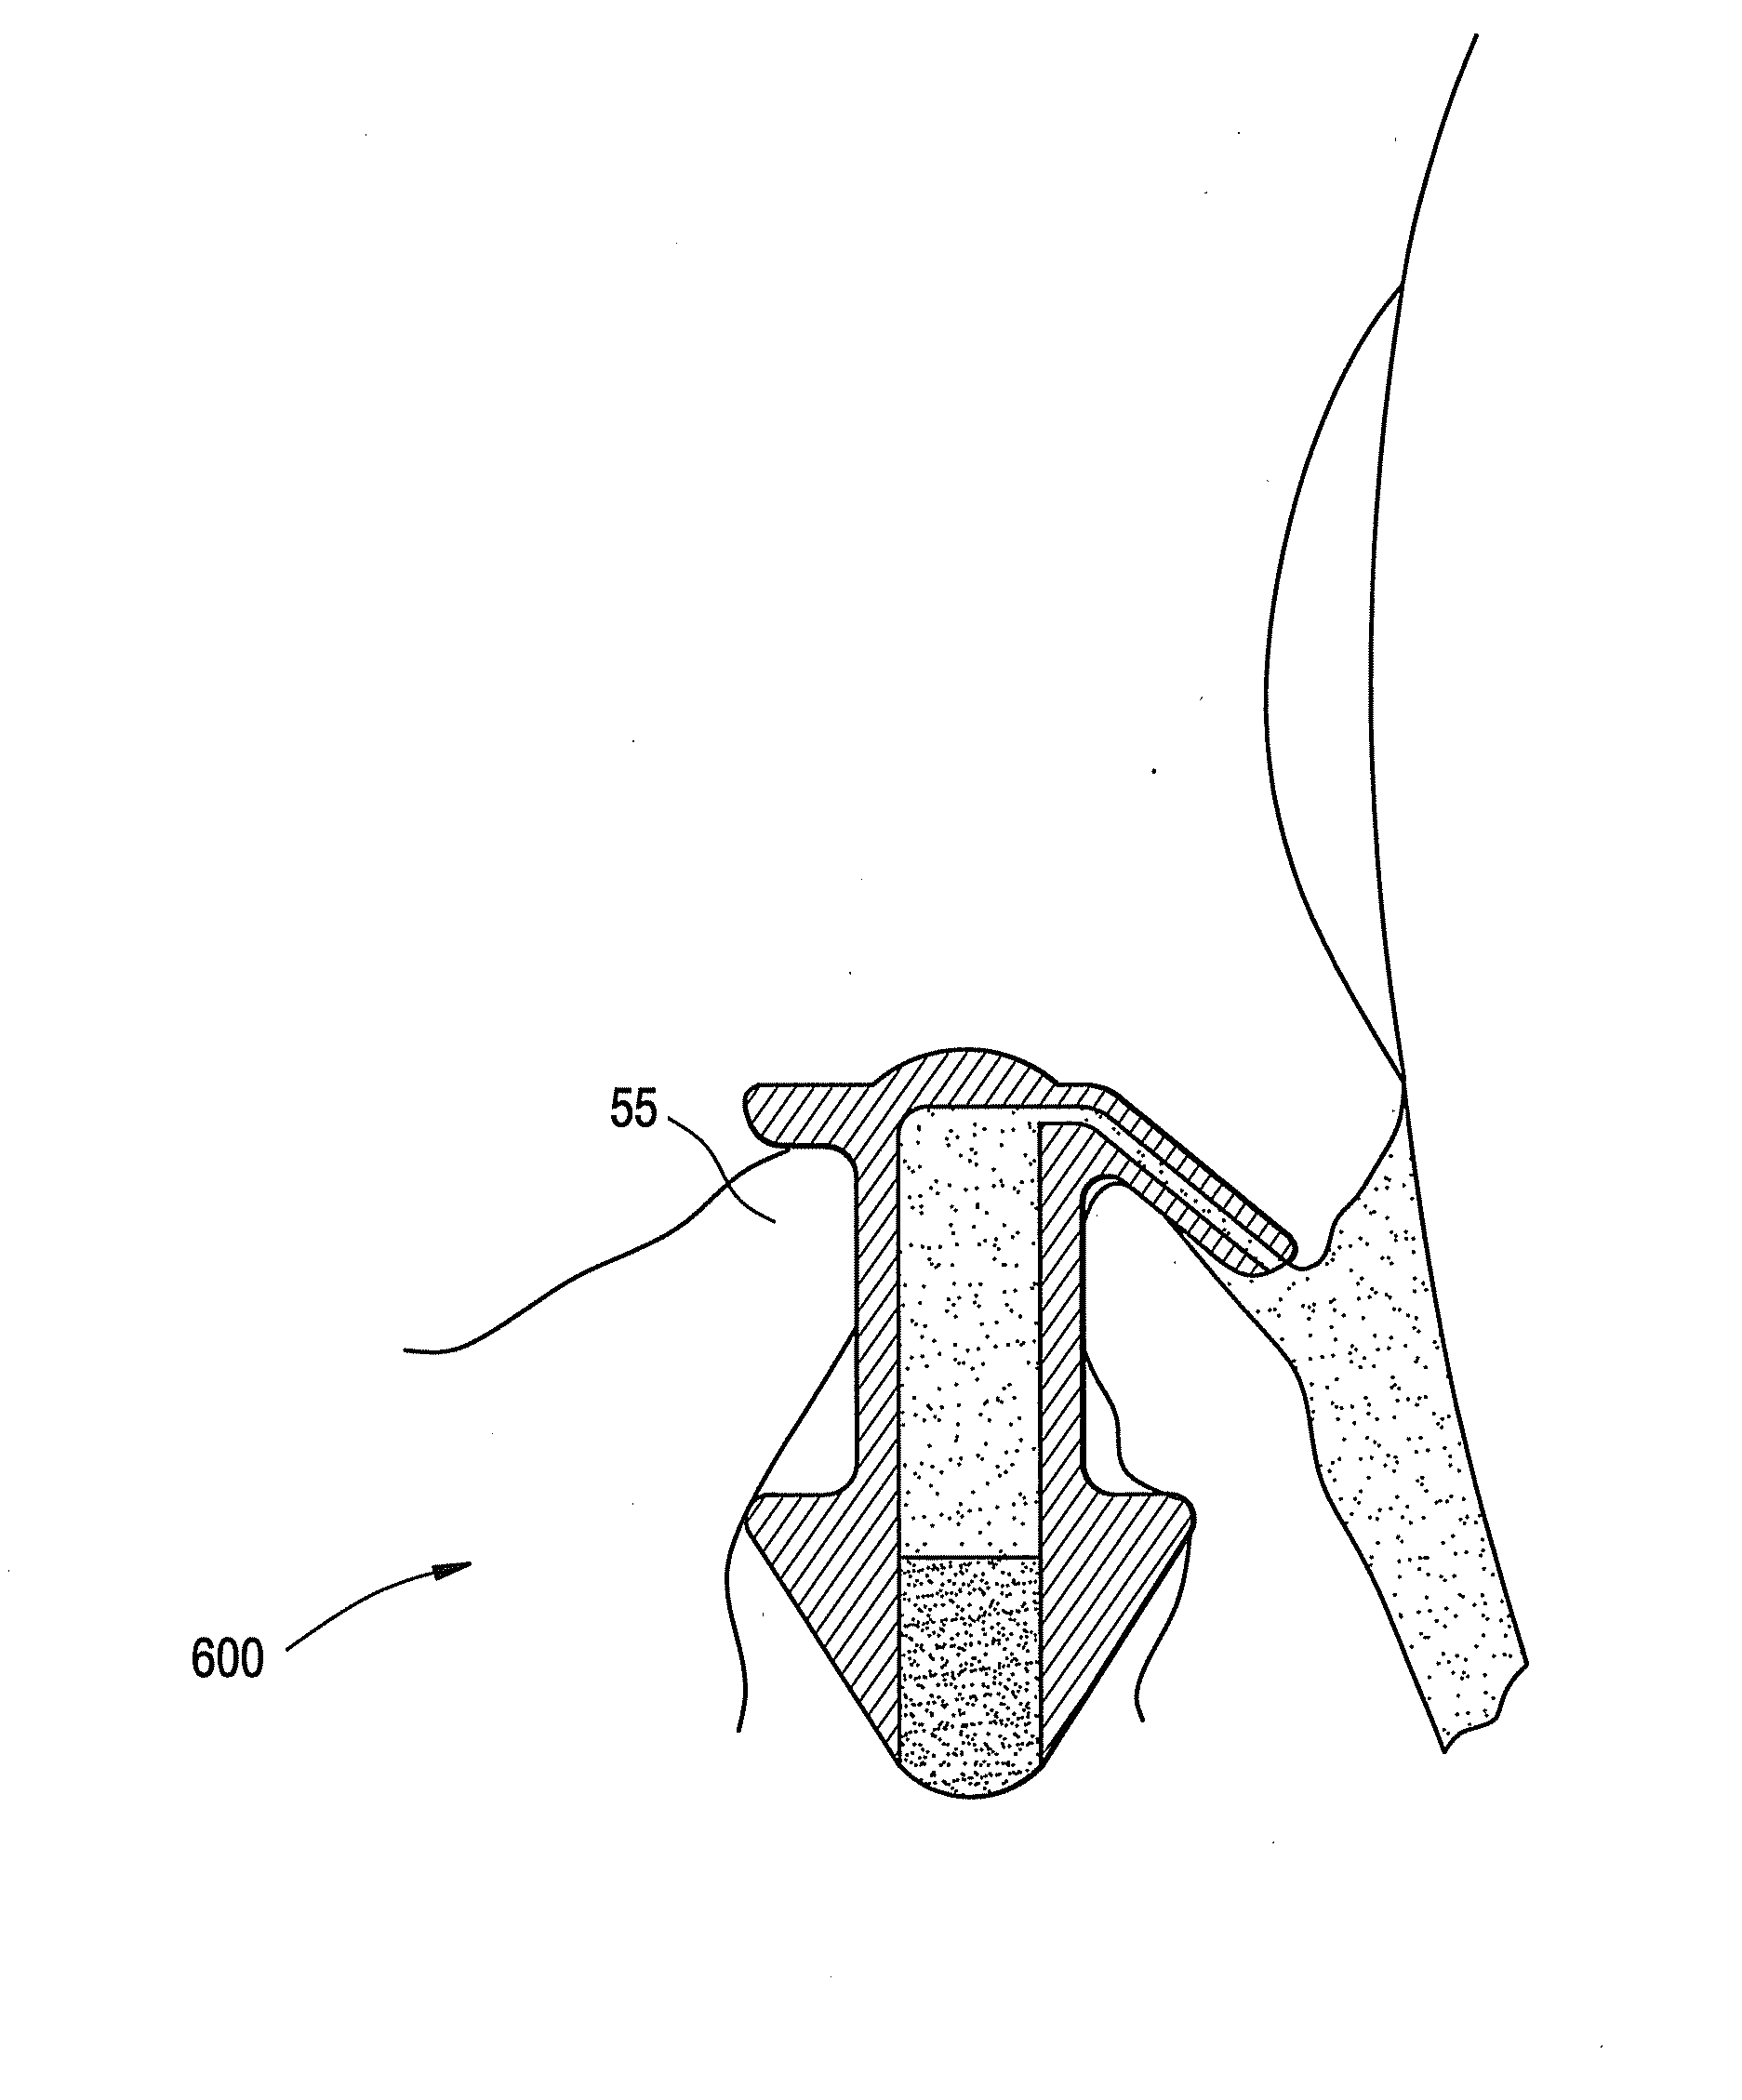 Punctal plugs with directional release